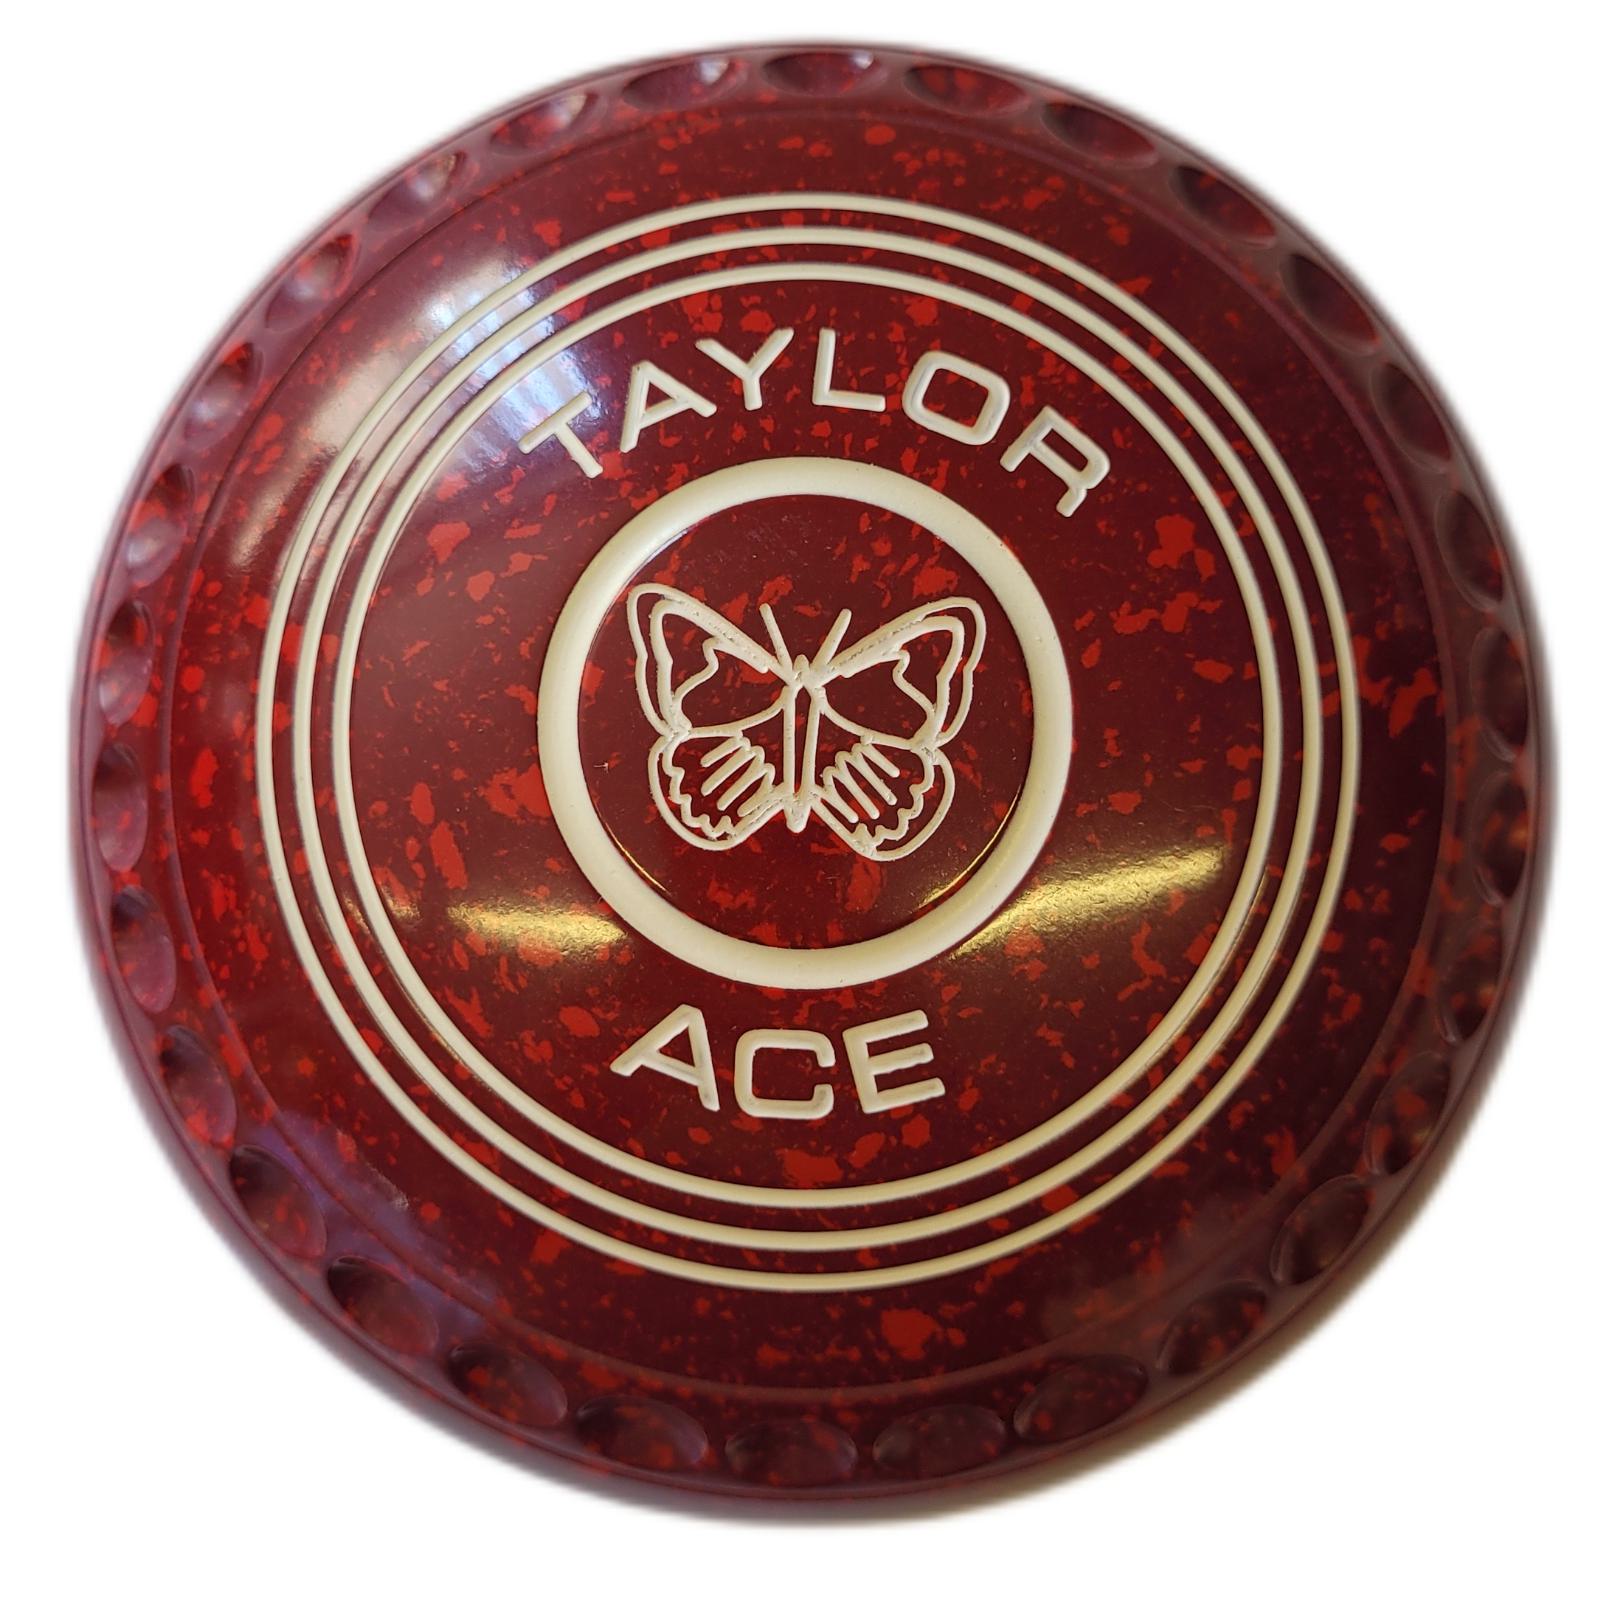 Taylor Ace size 5H Cherry Red Xtreme grip